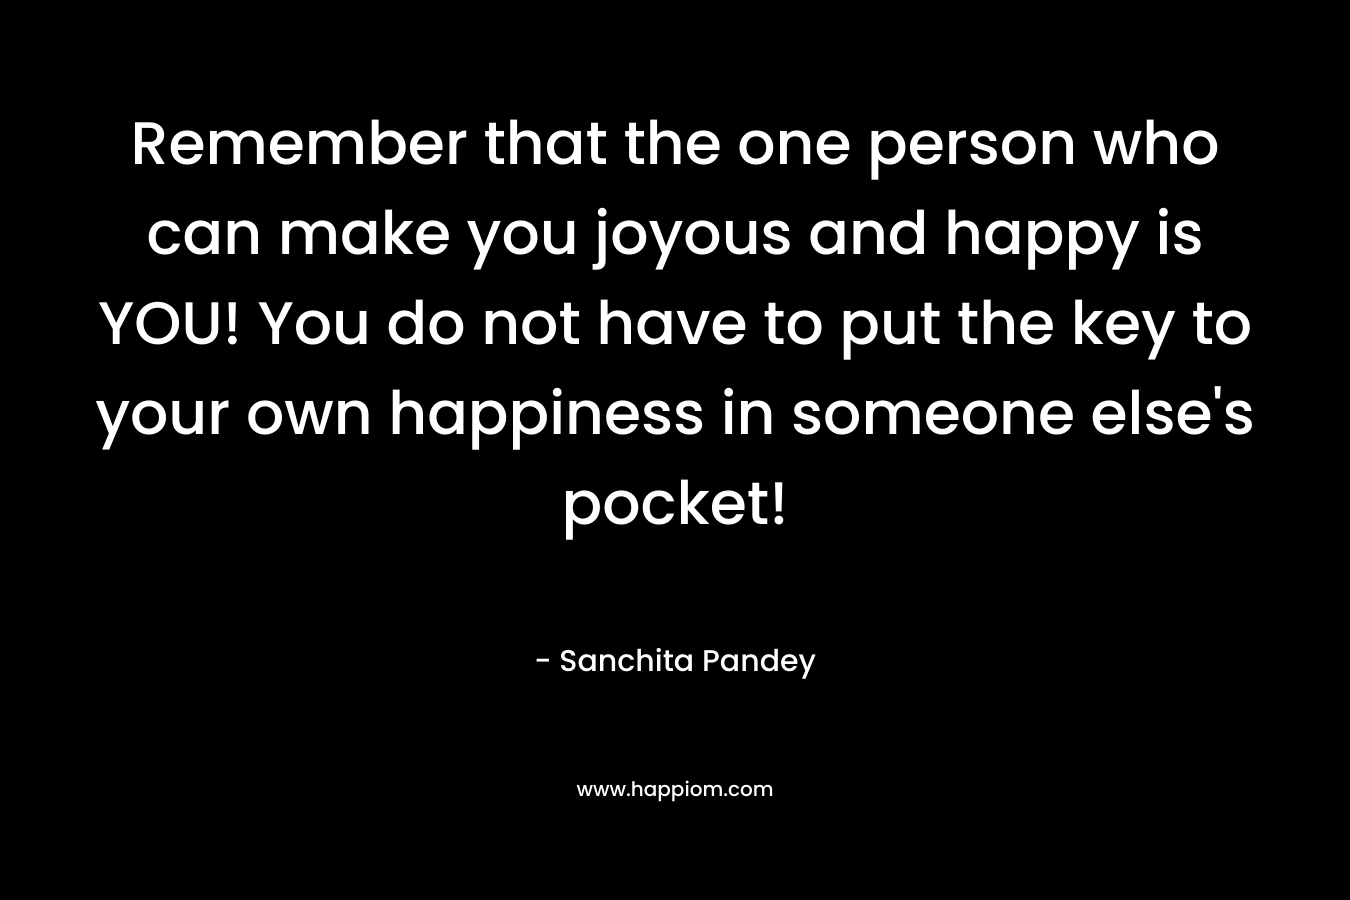 Remember that the one person who can make you joyous and happy is YOU! You do not have to put the key to your own happiness in someone else's pocket!